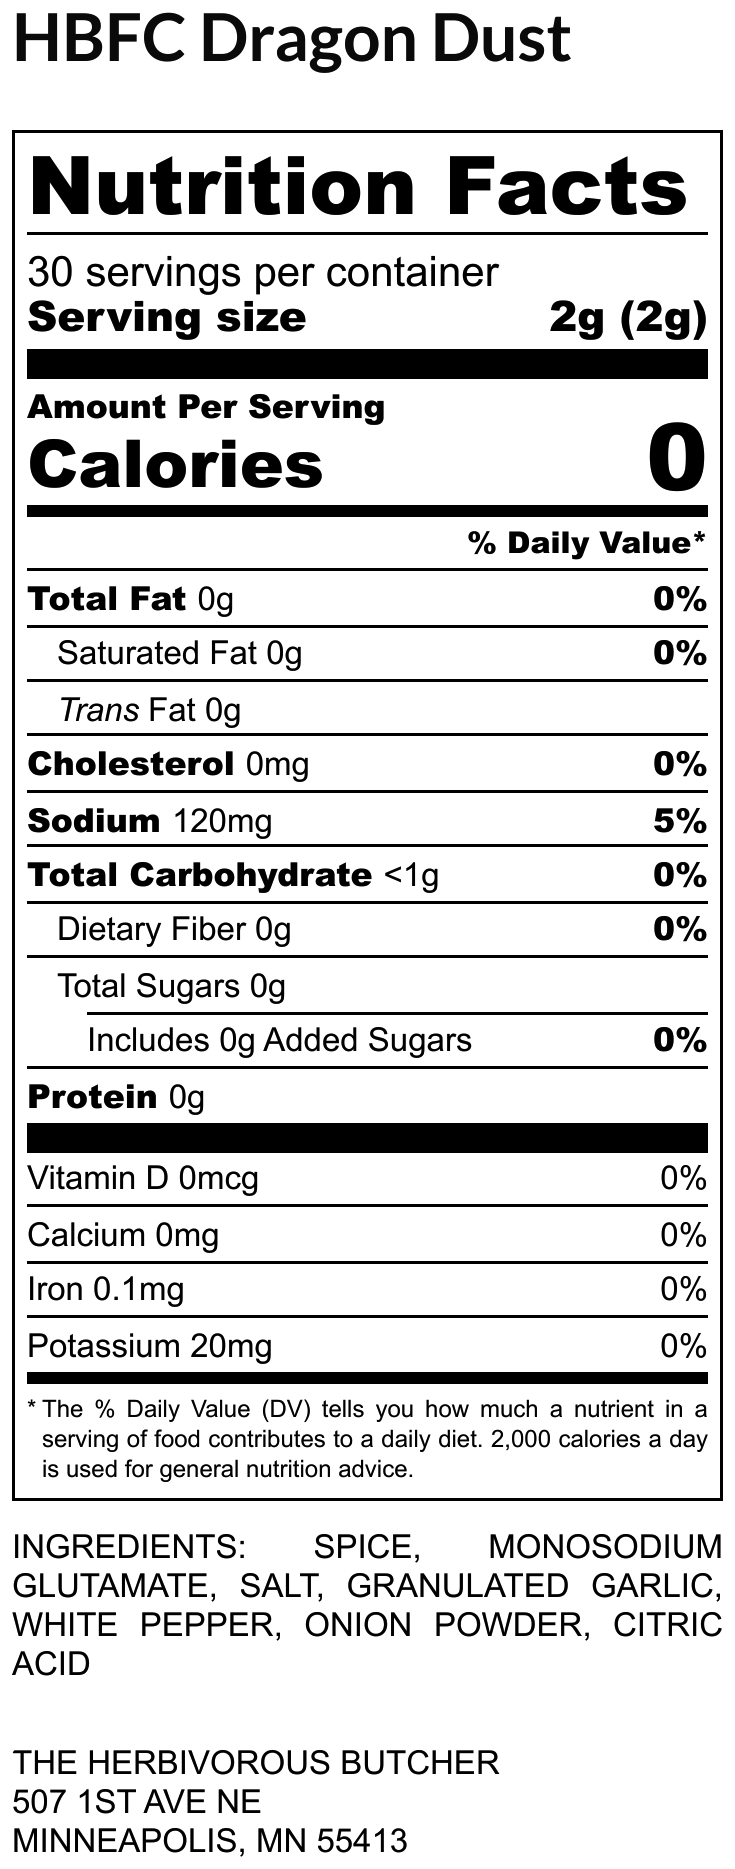 Nutrition info for Dragon dust